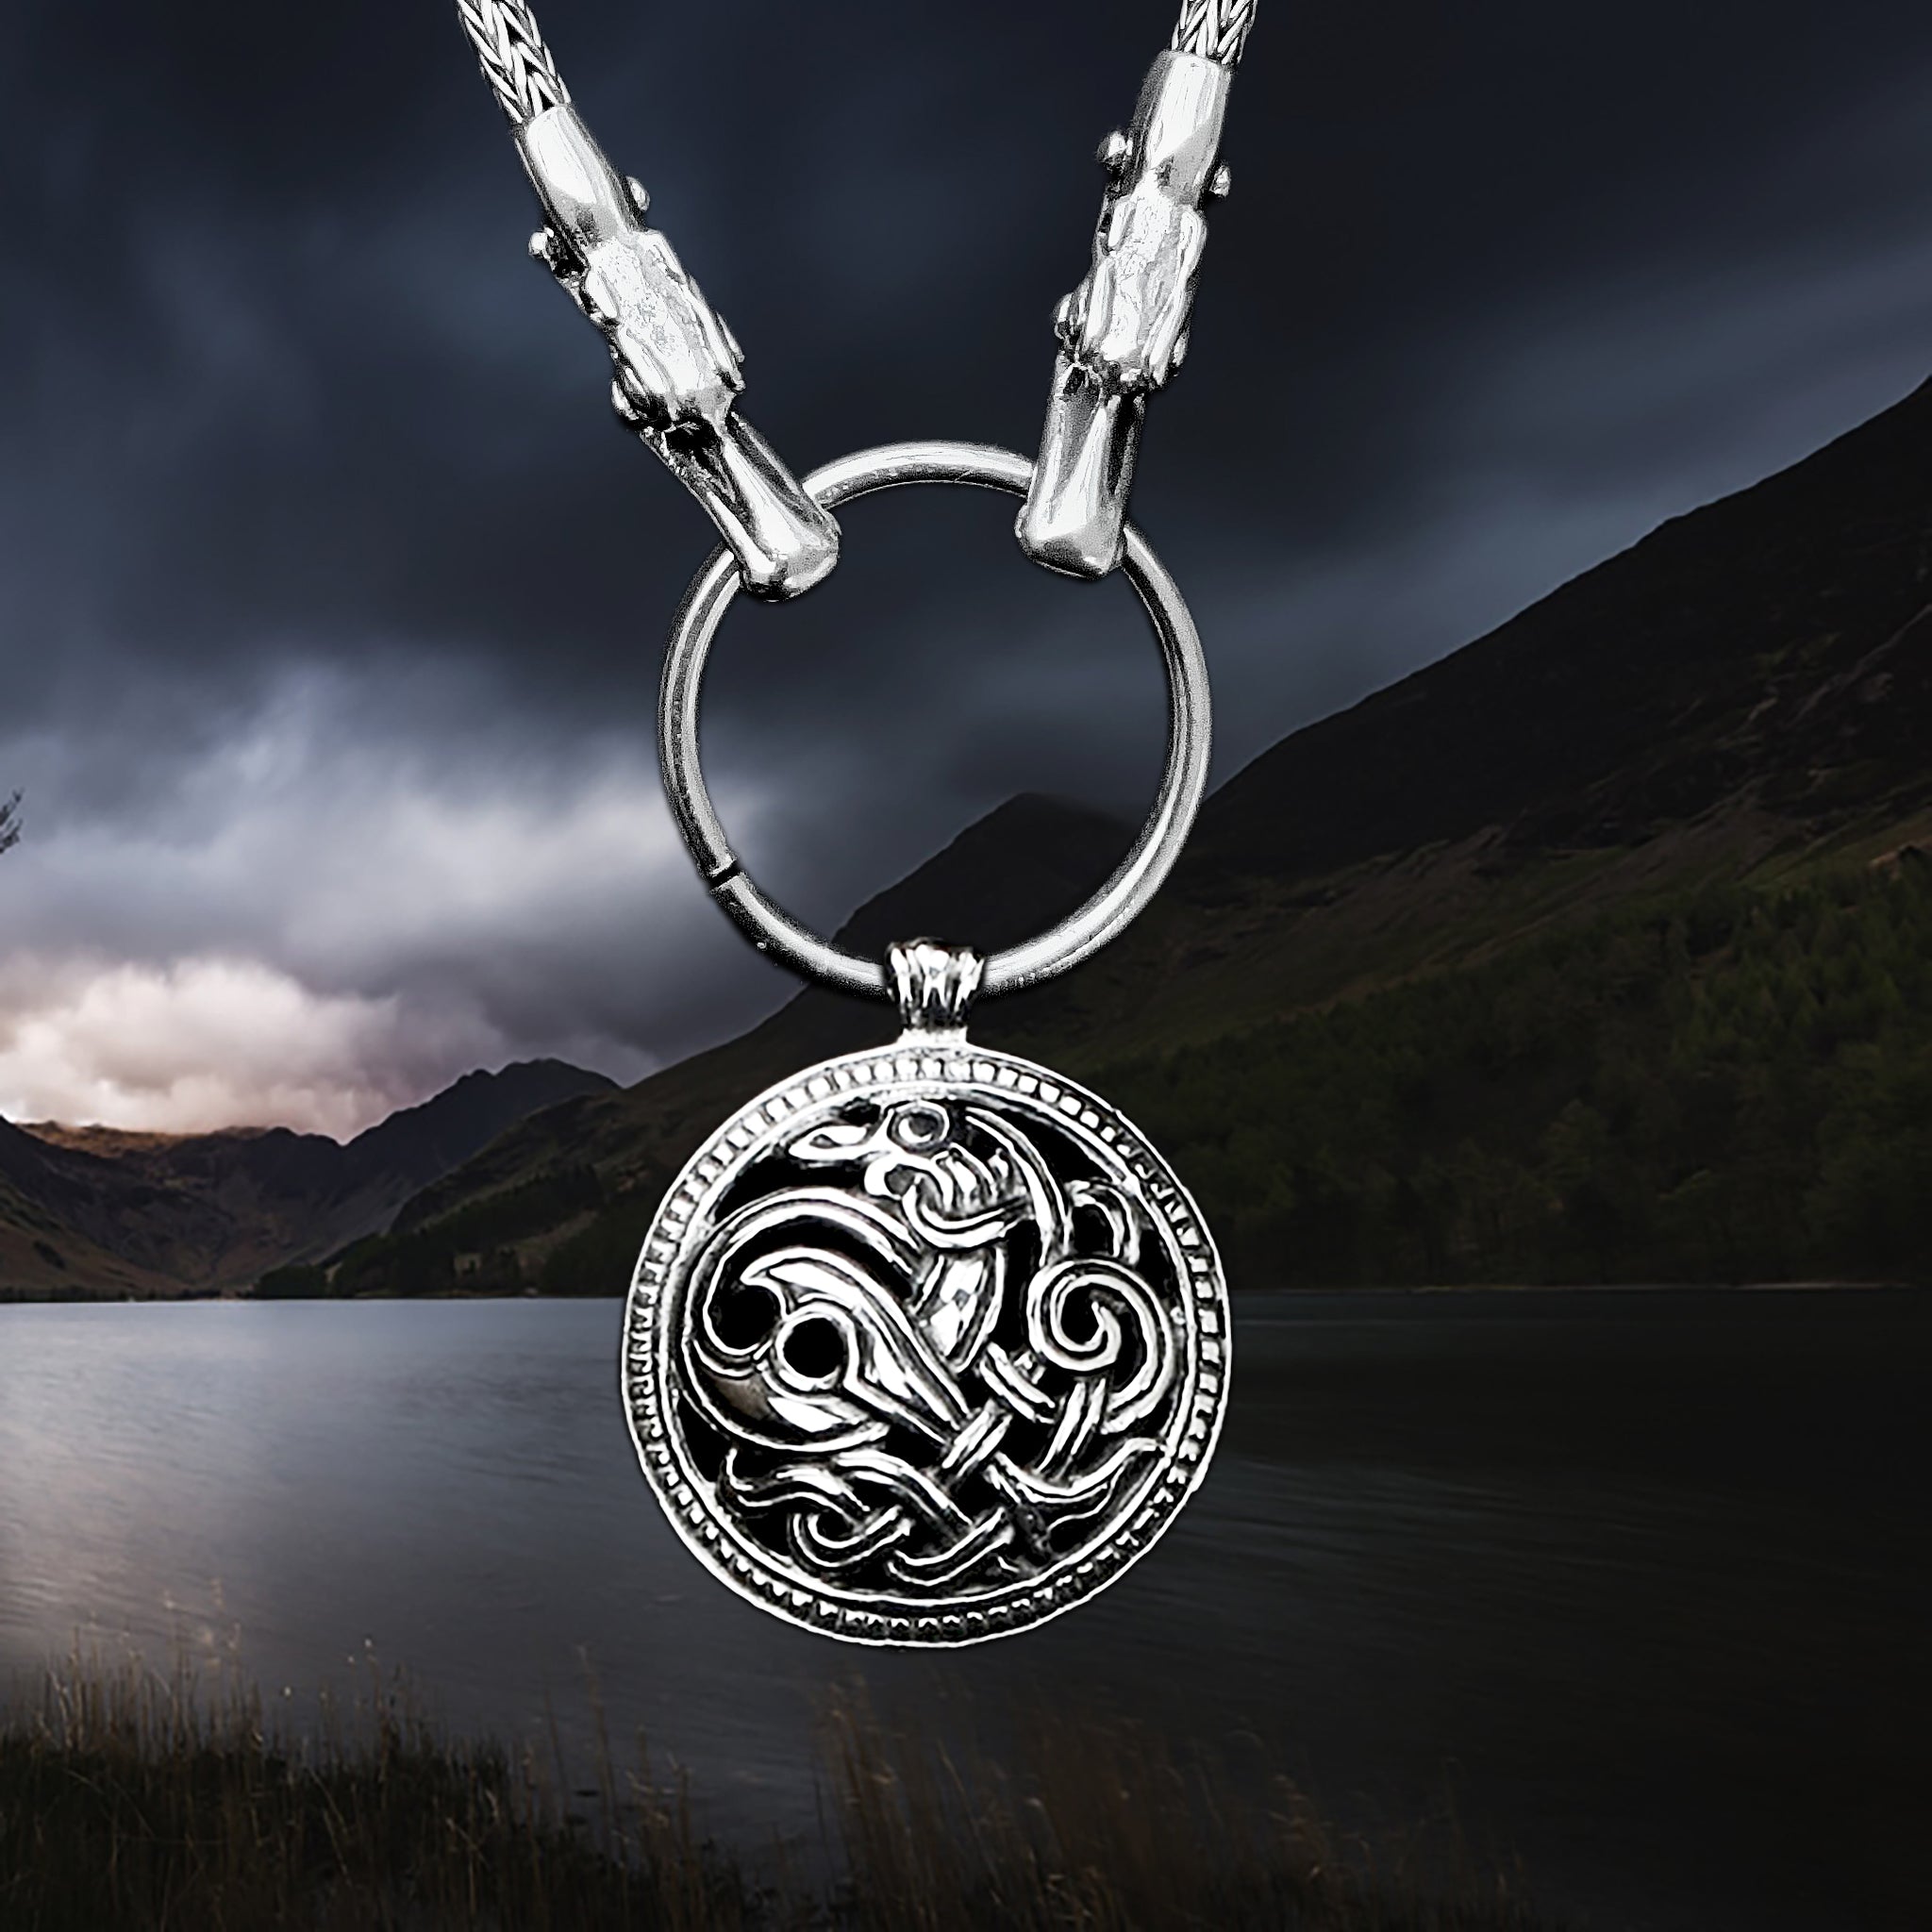 Slim Silver Snake Chain Pendant Necklace with Tromso Dragon Heads and Split Ring with Jelling Dragon Pendant